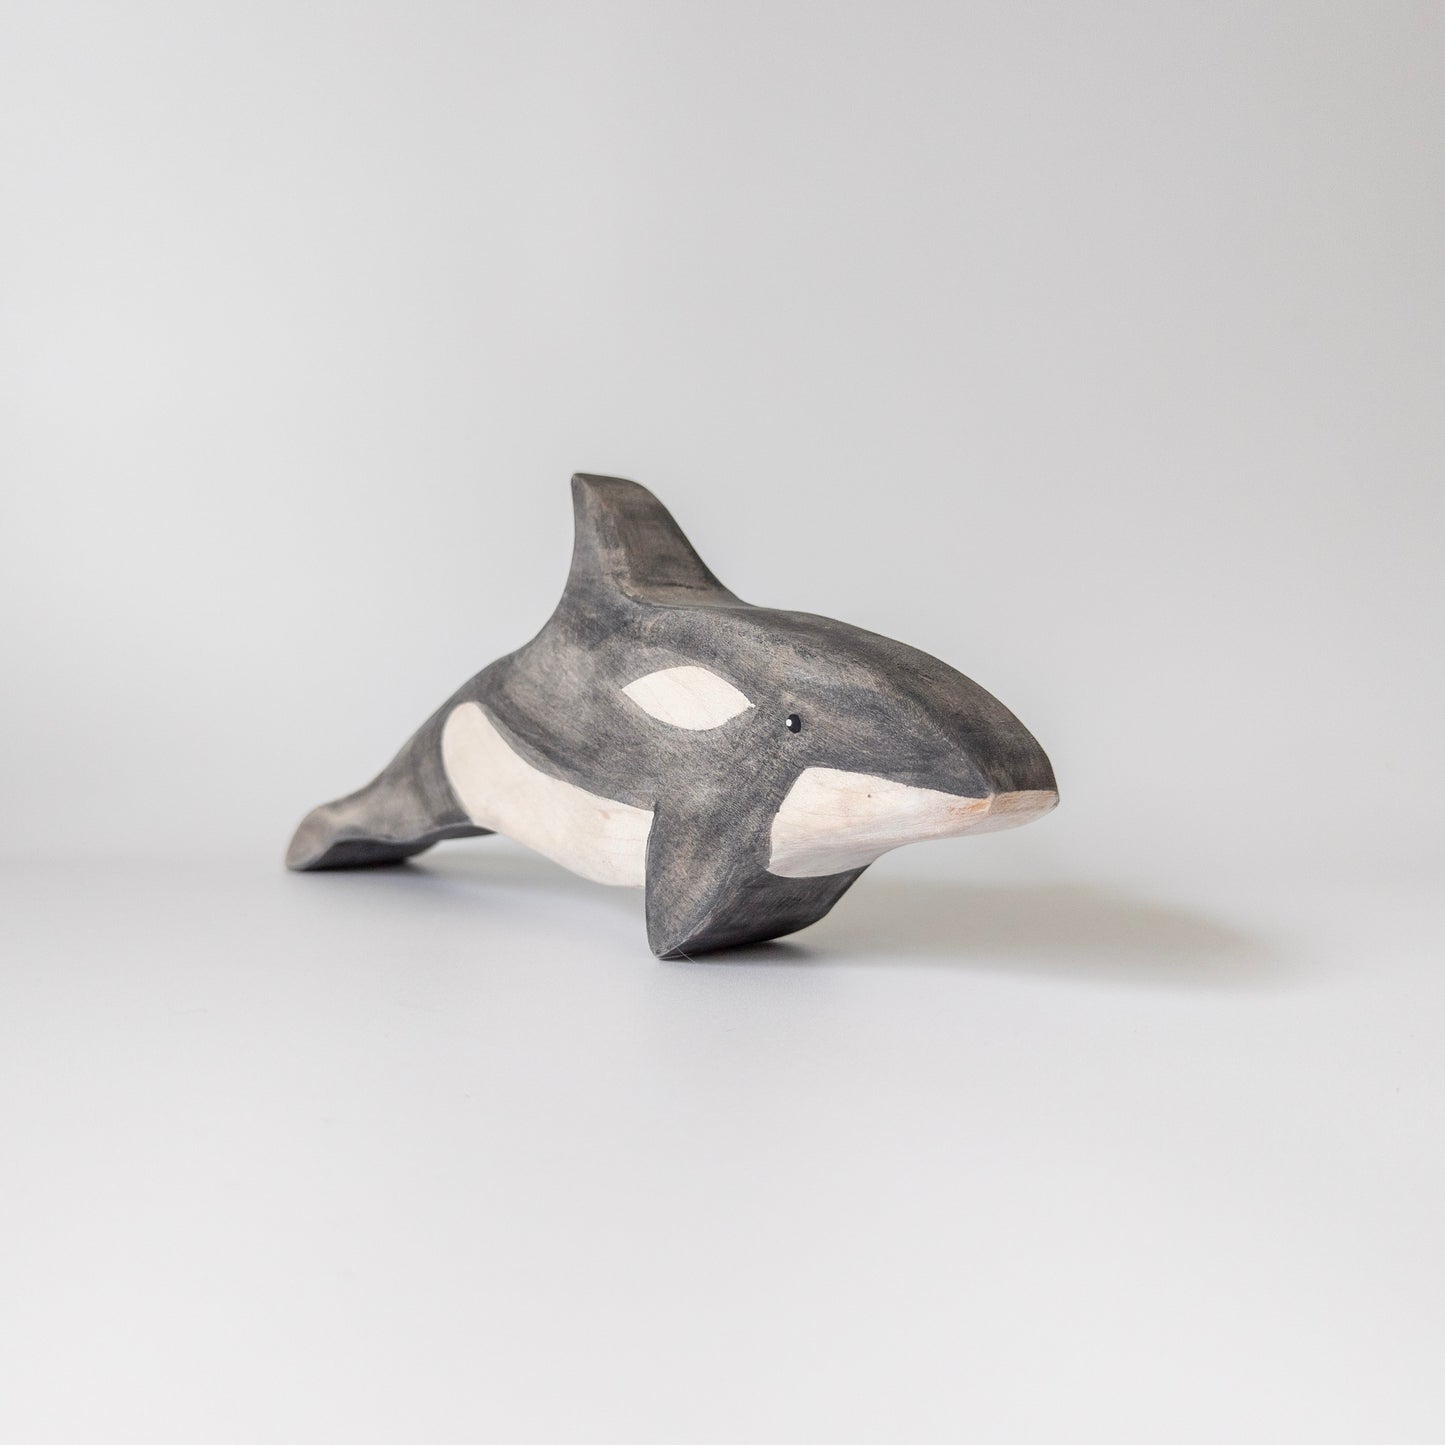 Orca ~ Killer Whale Wooden Toy